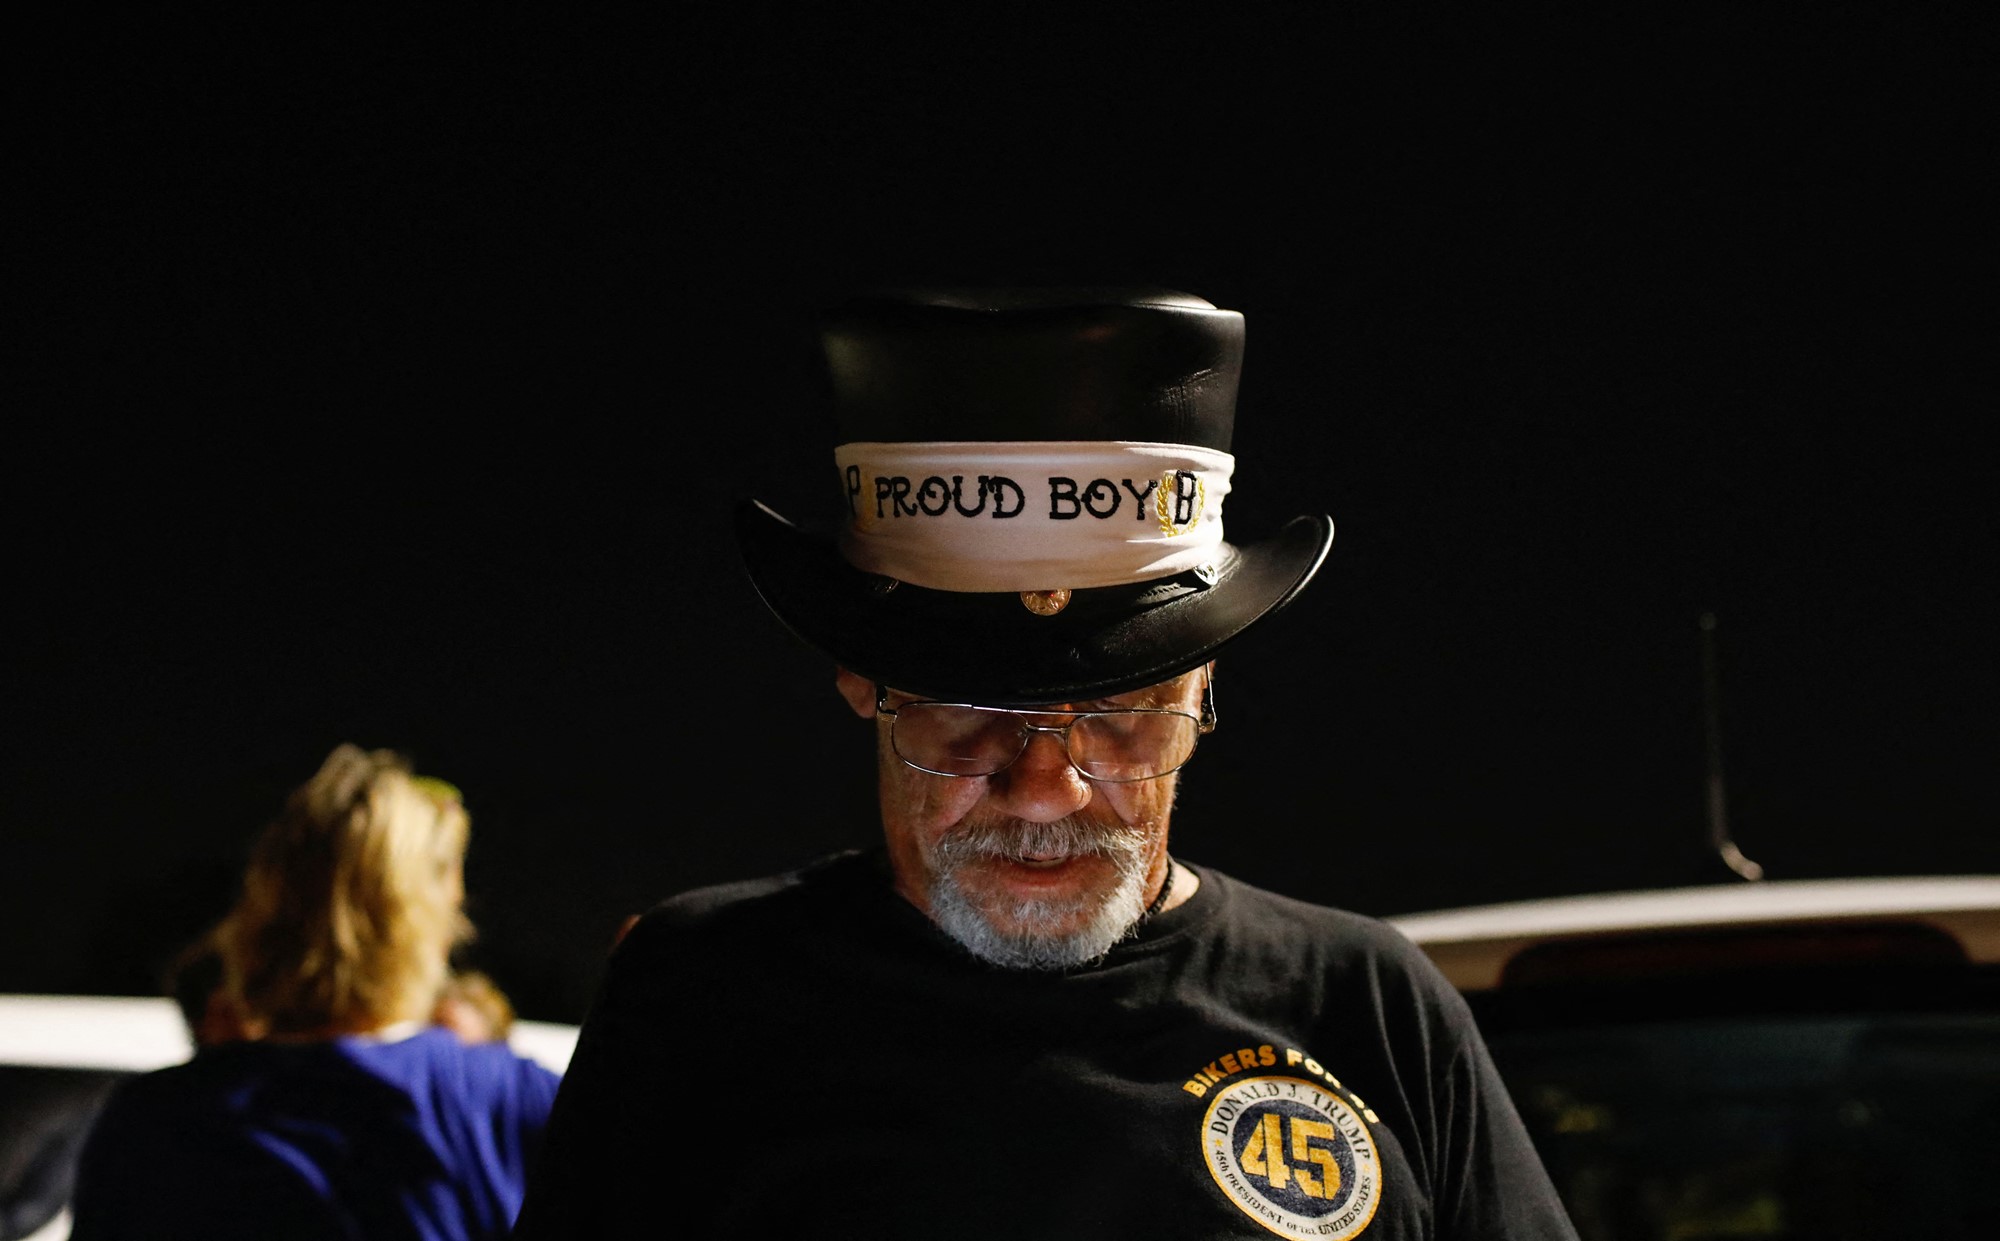 A man wears  a hat that says "proud boys"